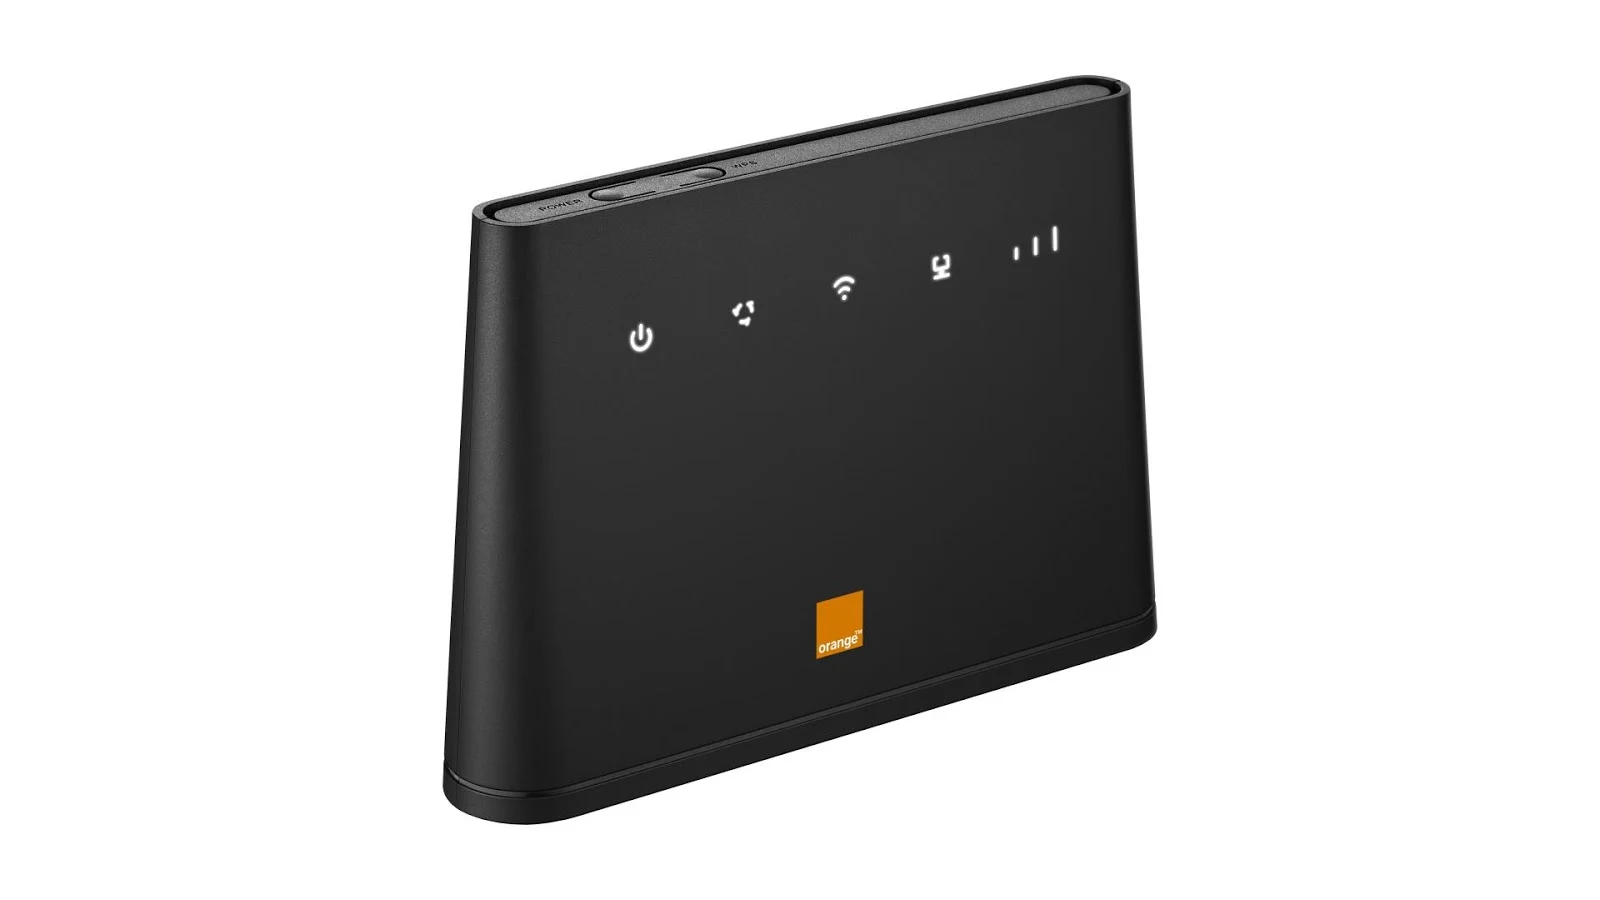 The Orange Flybox 4G Huawei B310S Router